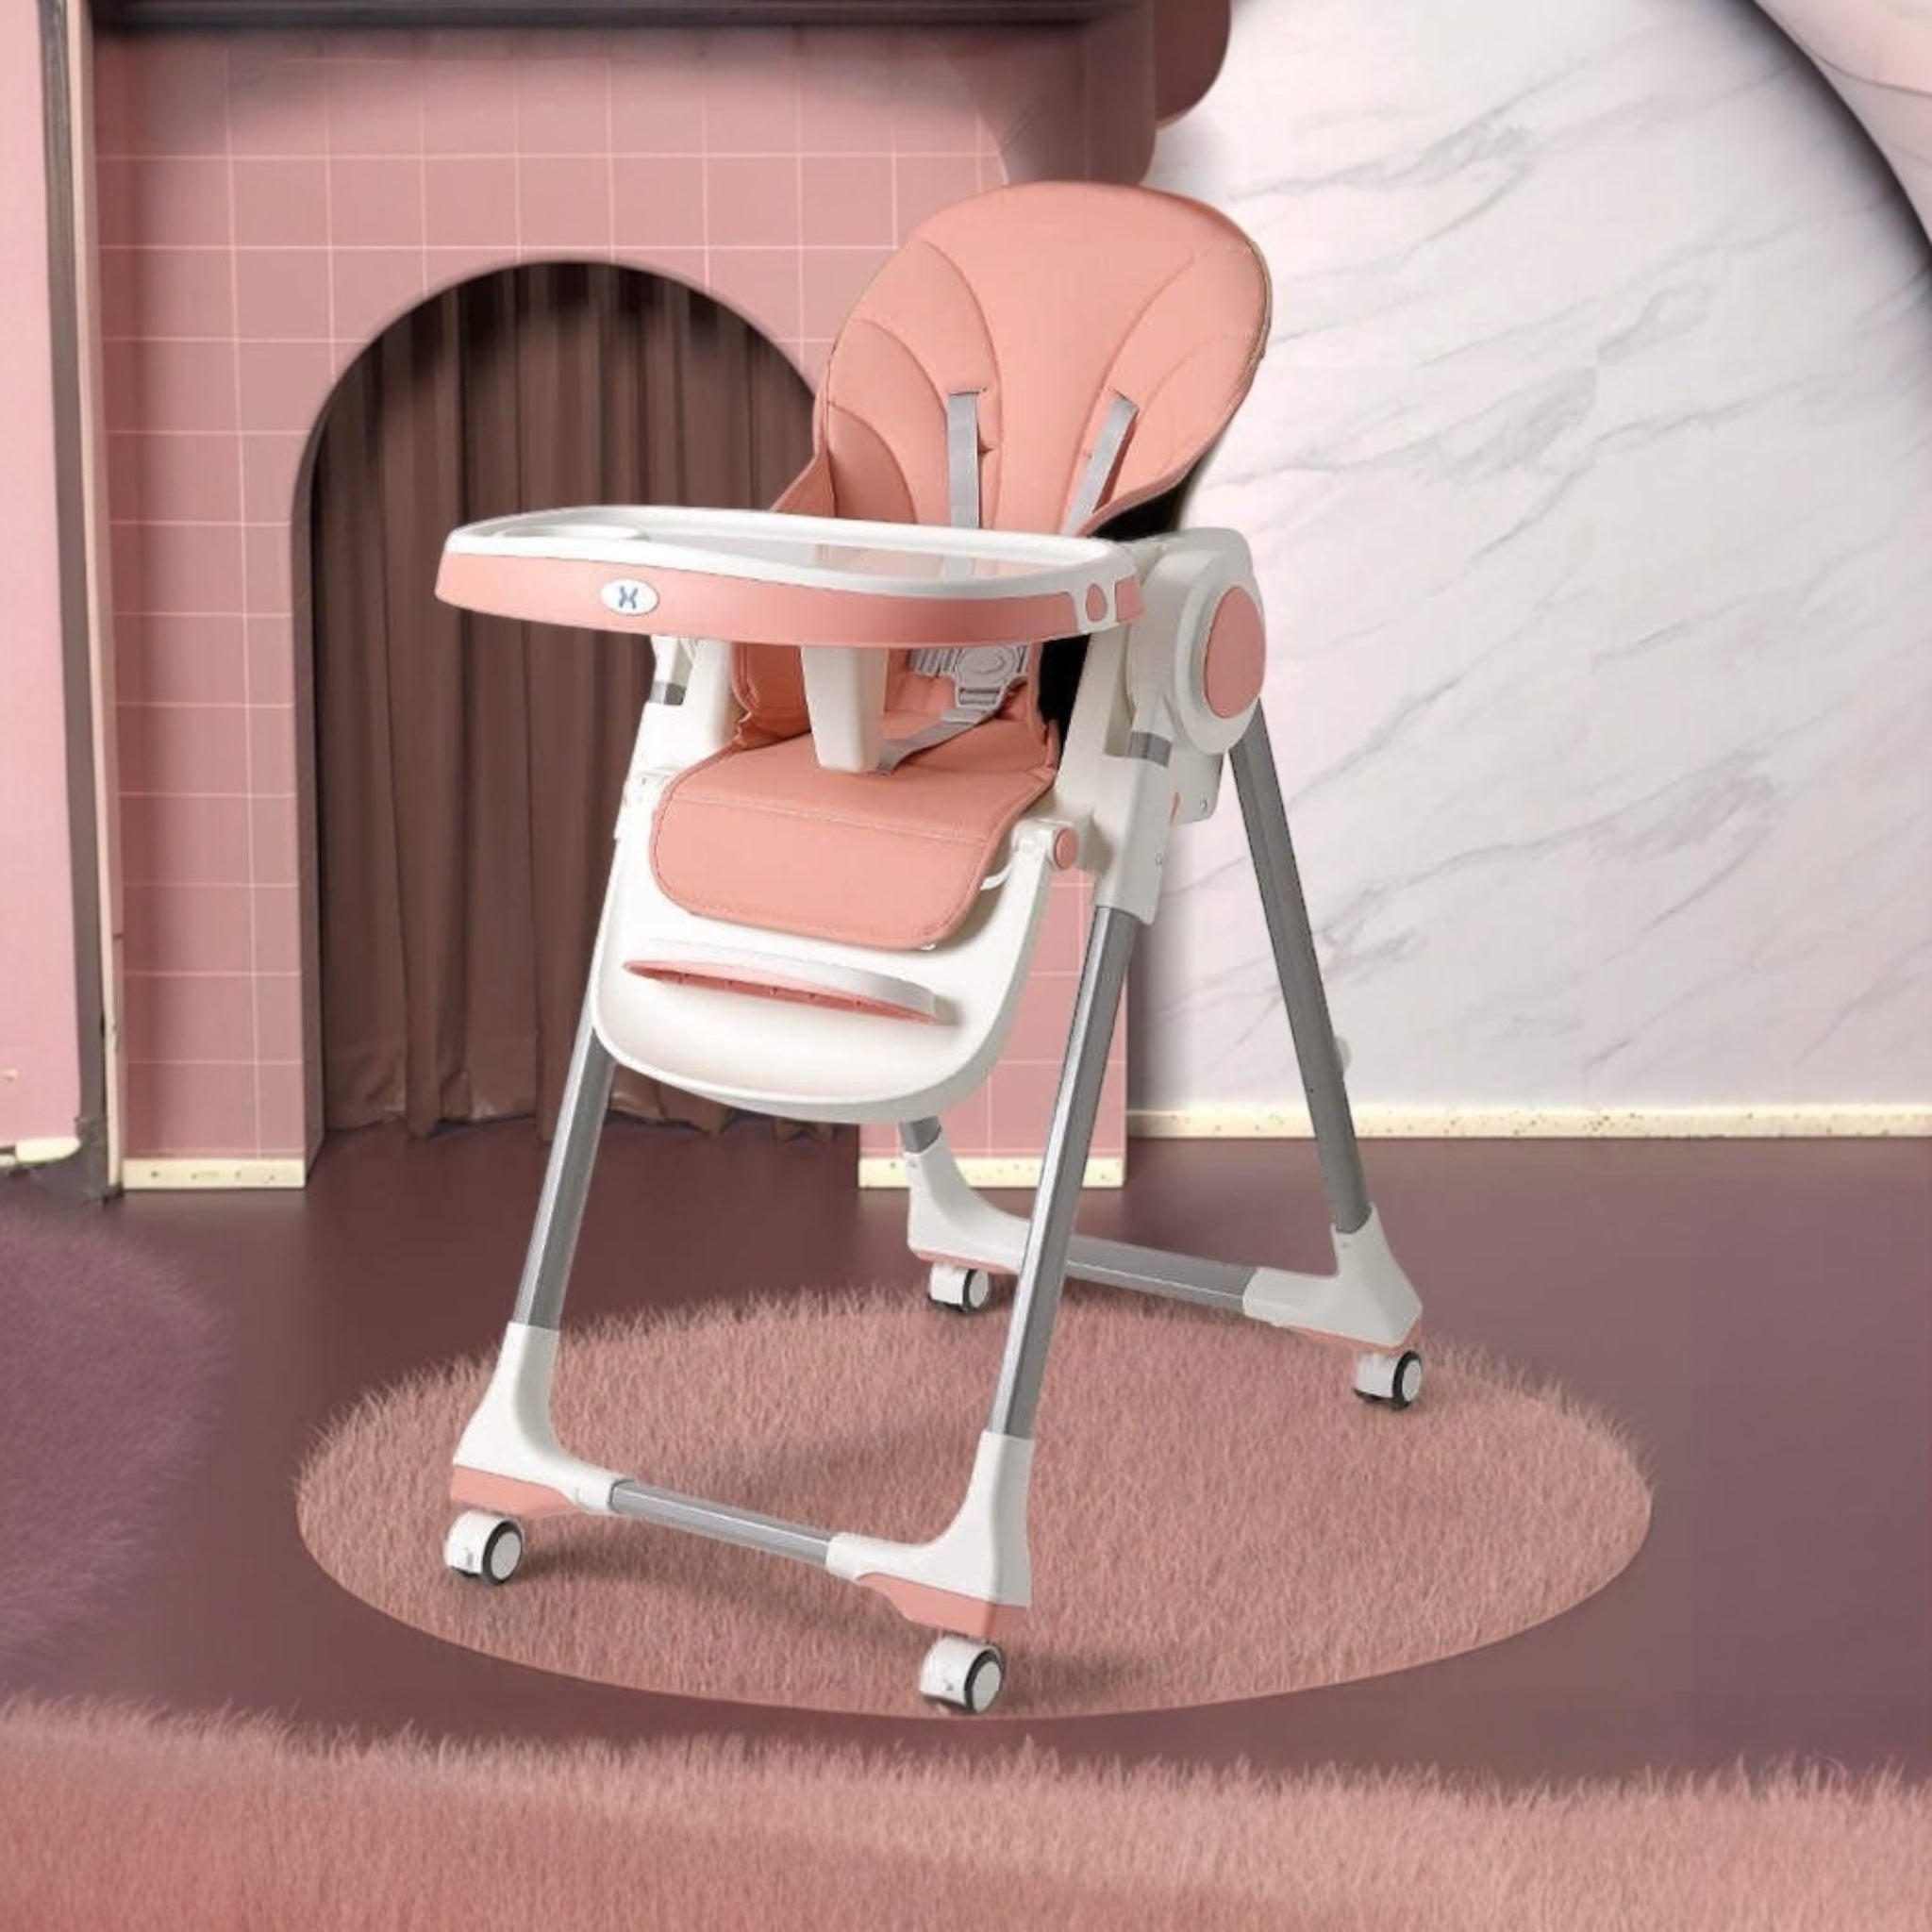 3 In 1 Baby Highchair Dining Highchair With Reclining Seat